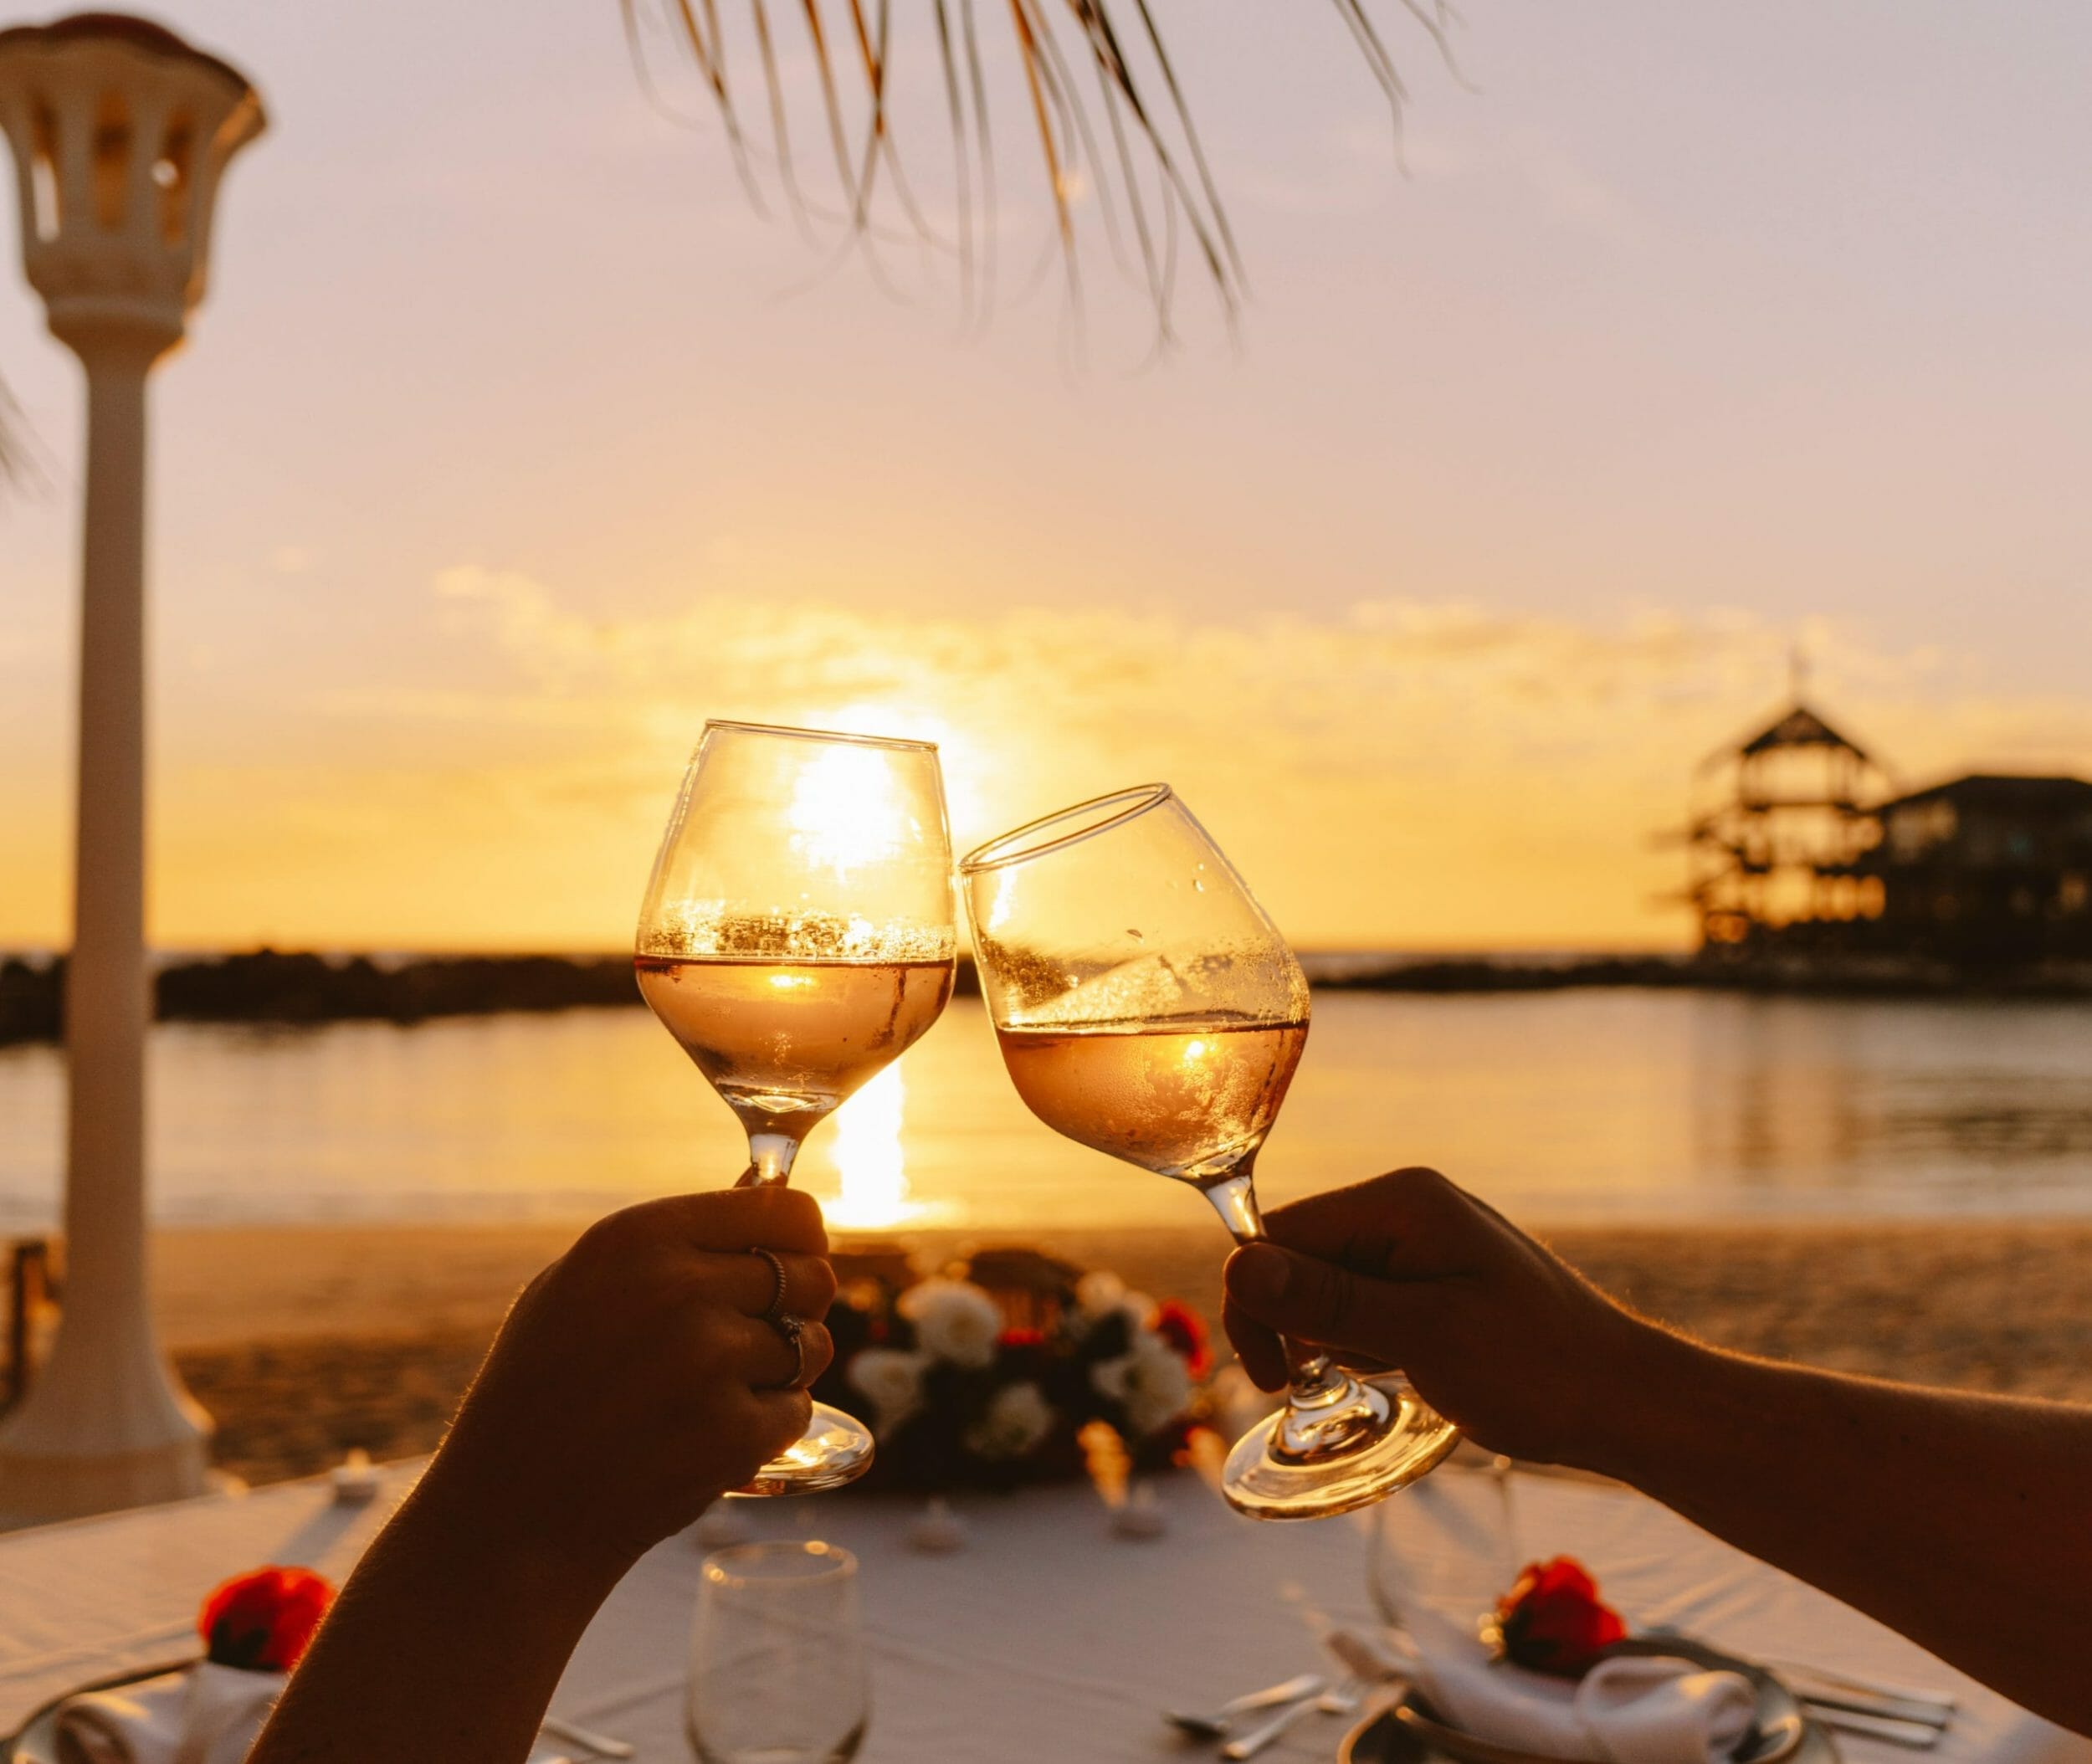 FB Romantic Dinner on the beach for two scaled